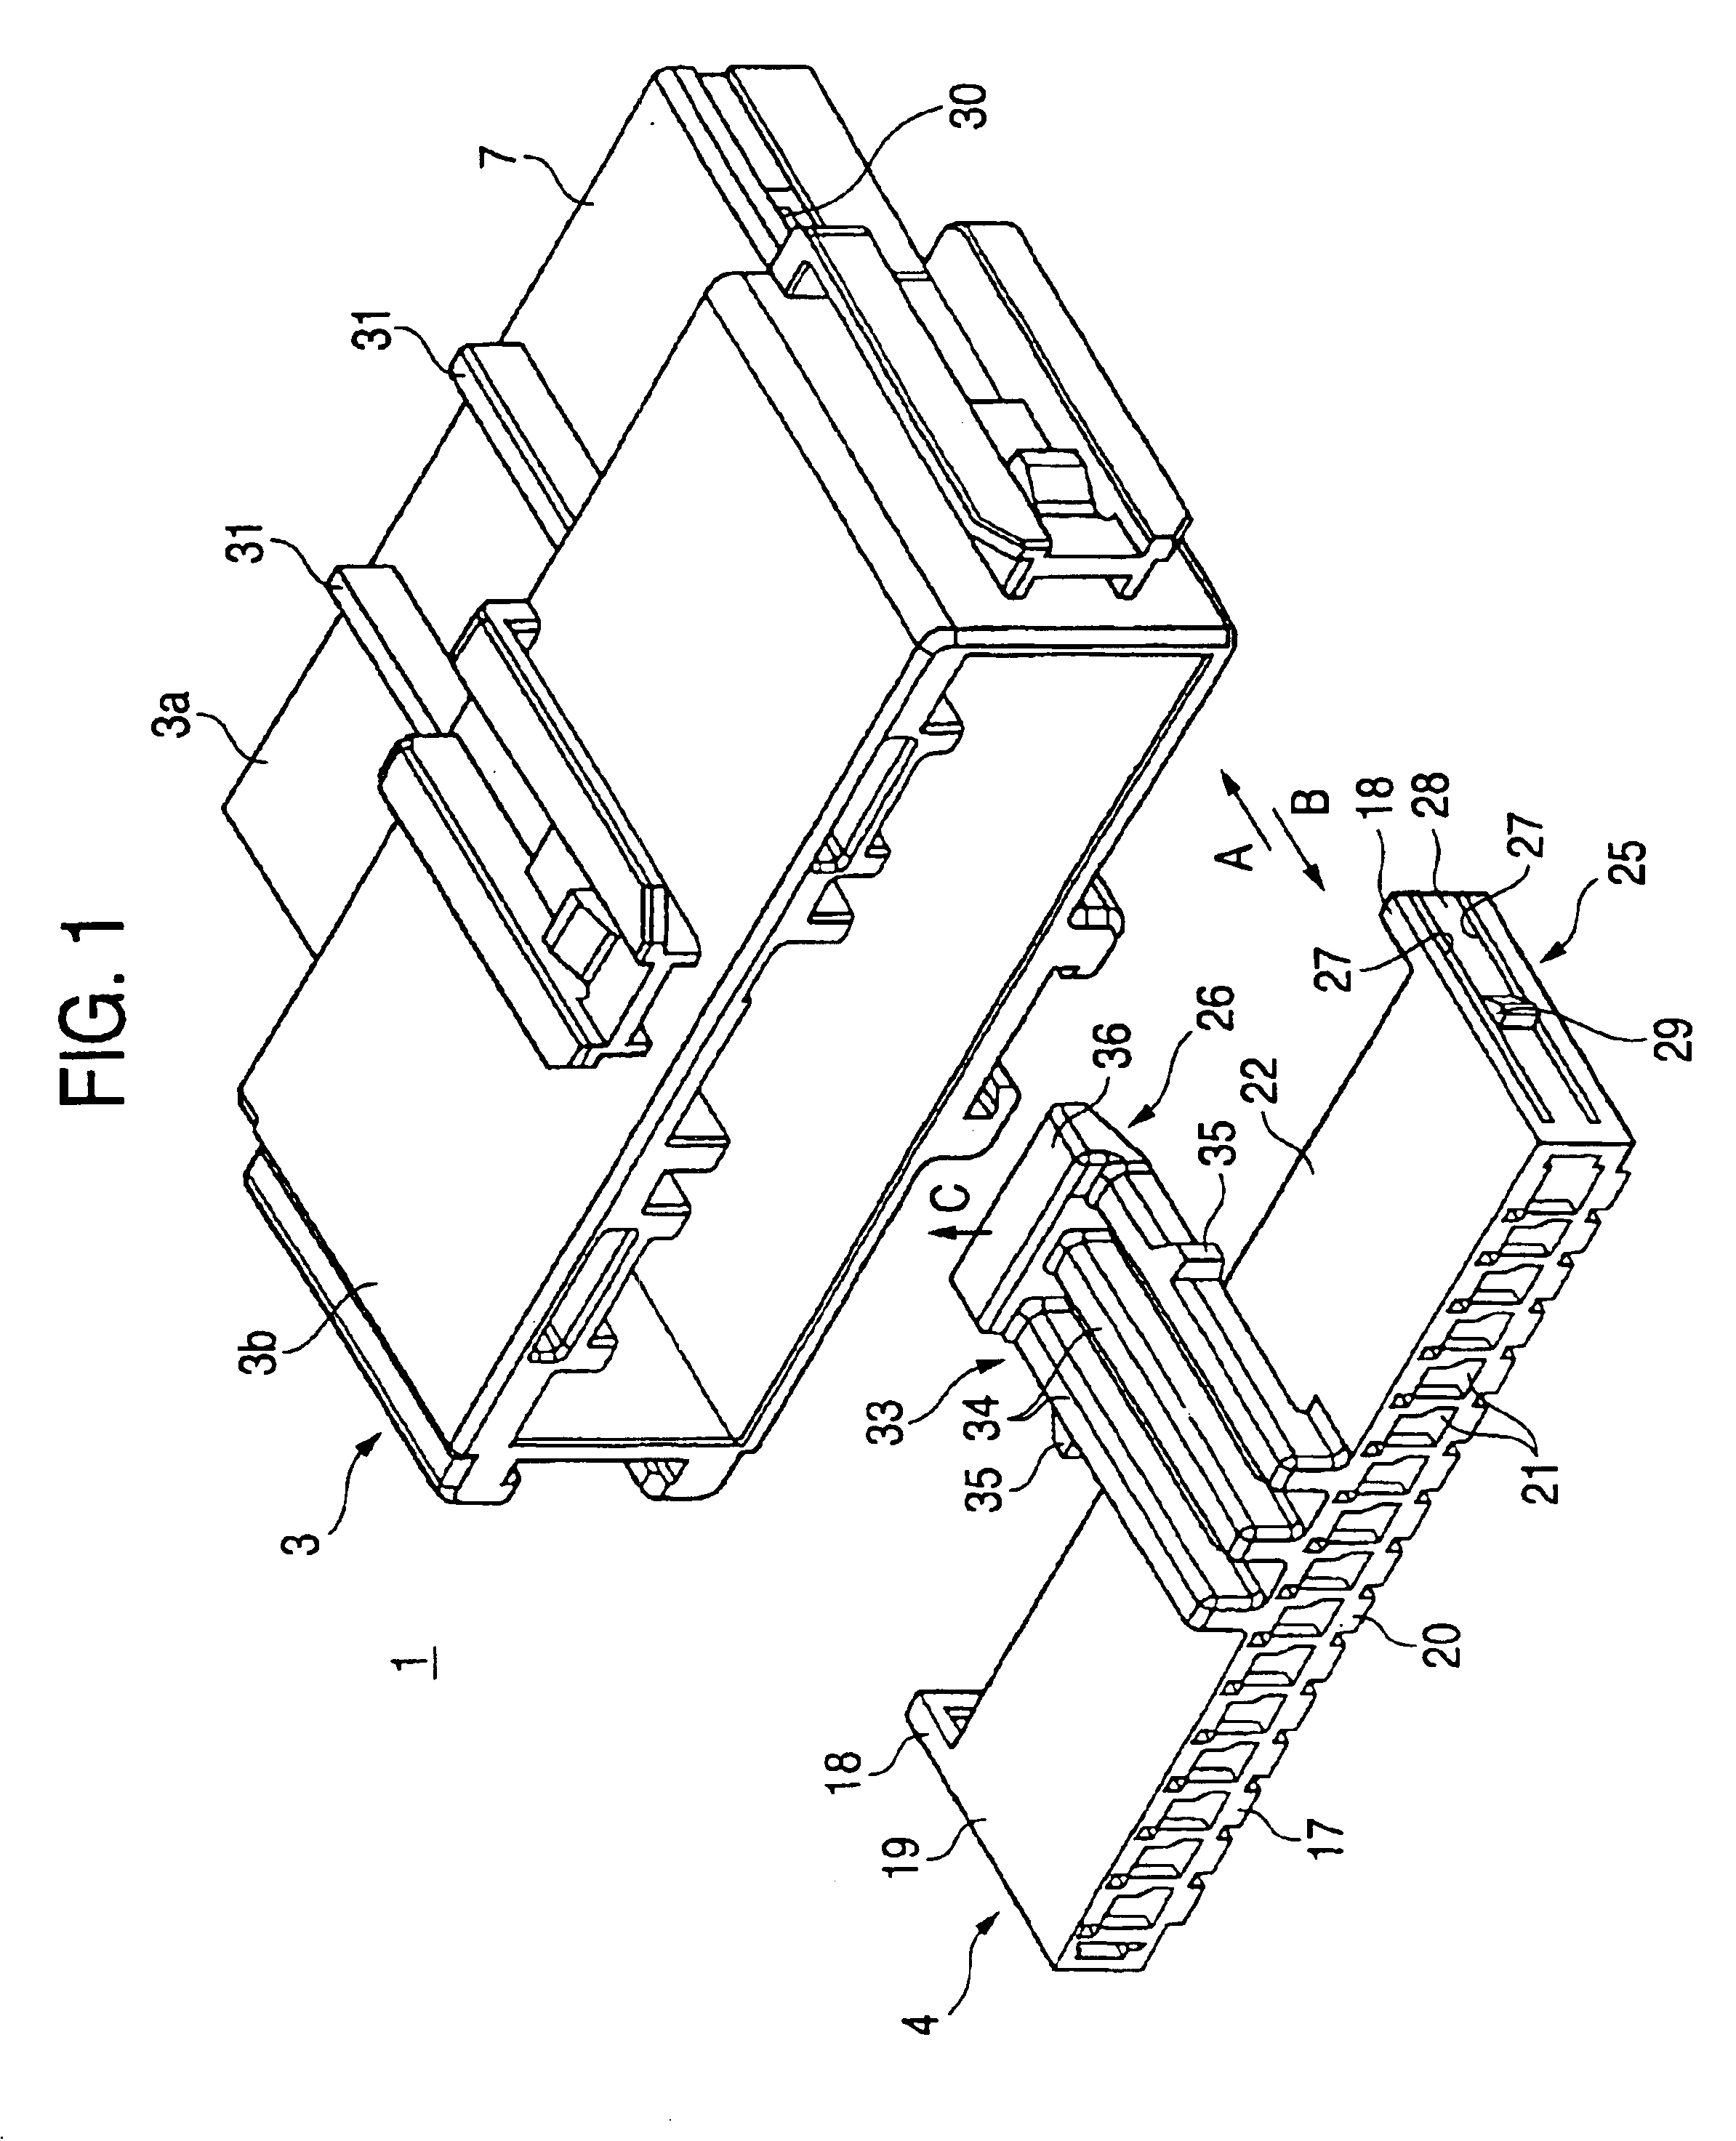 Connector having an improved front holder design for retaining terminals